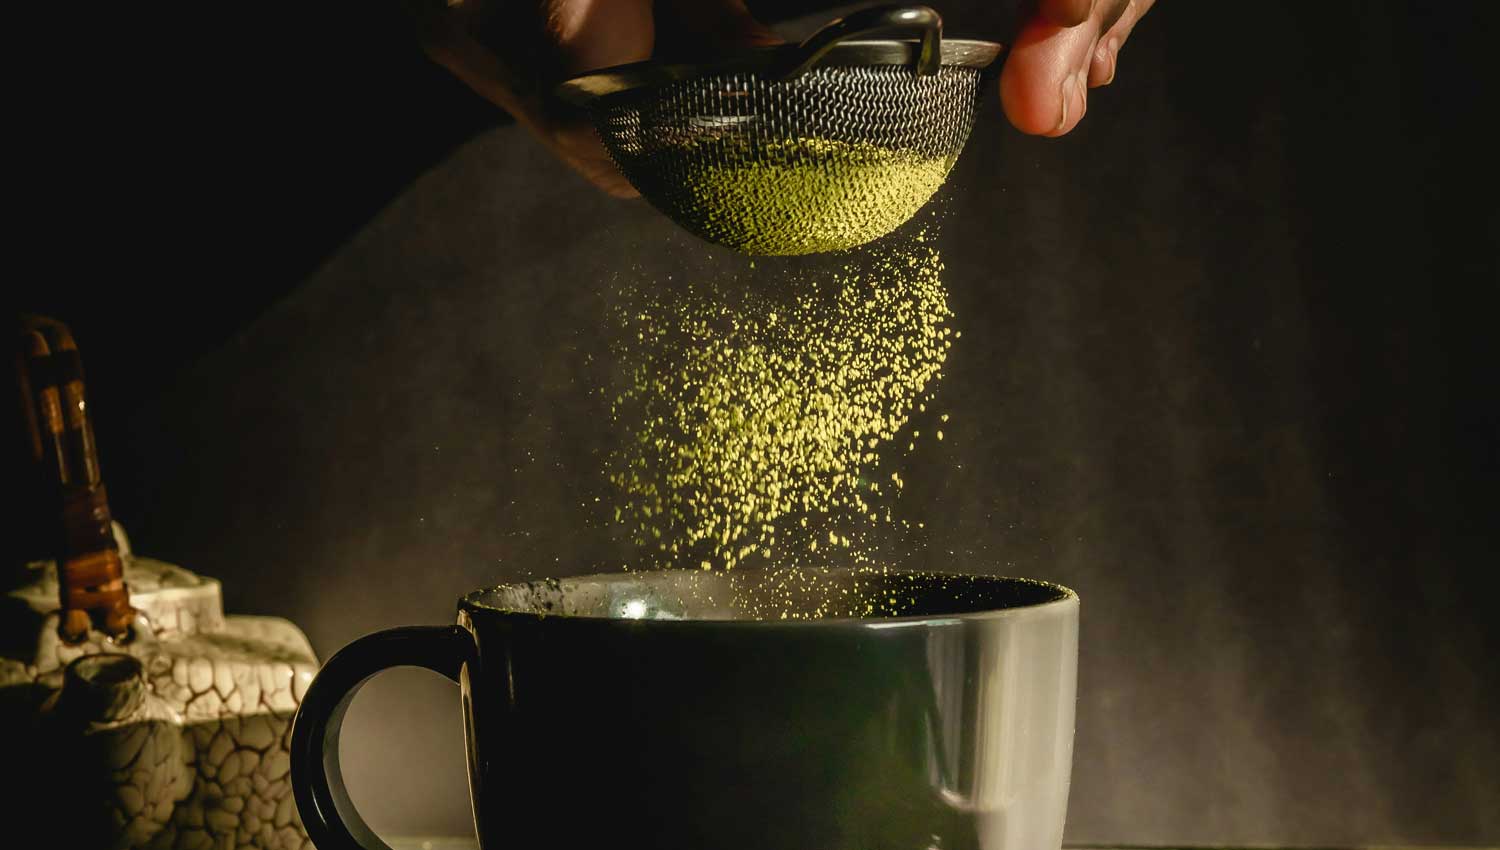 Featured image for “Matcha Might be Your Cup of Tea”